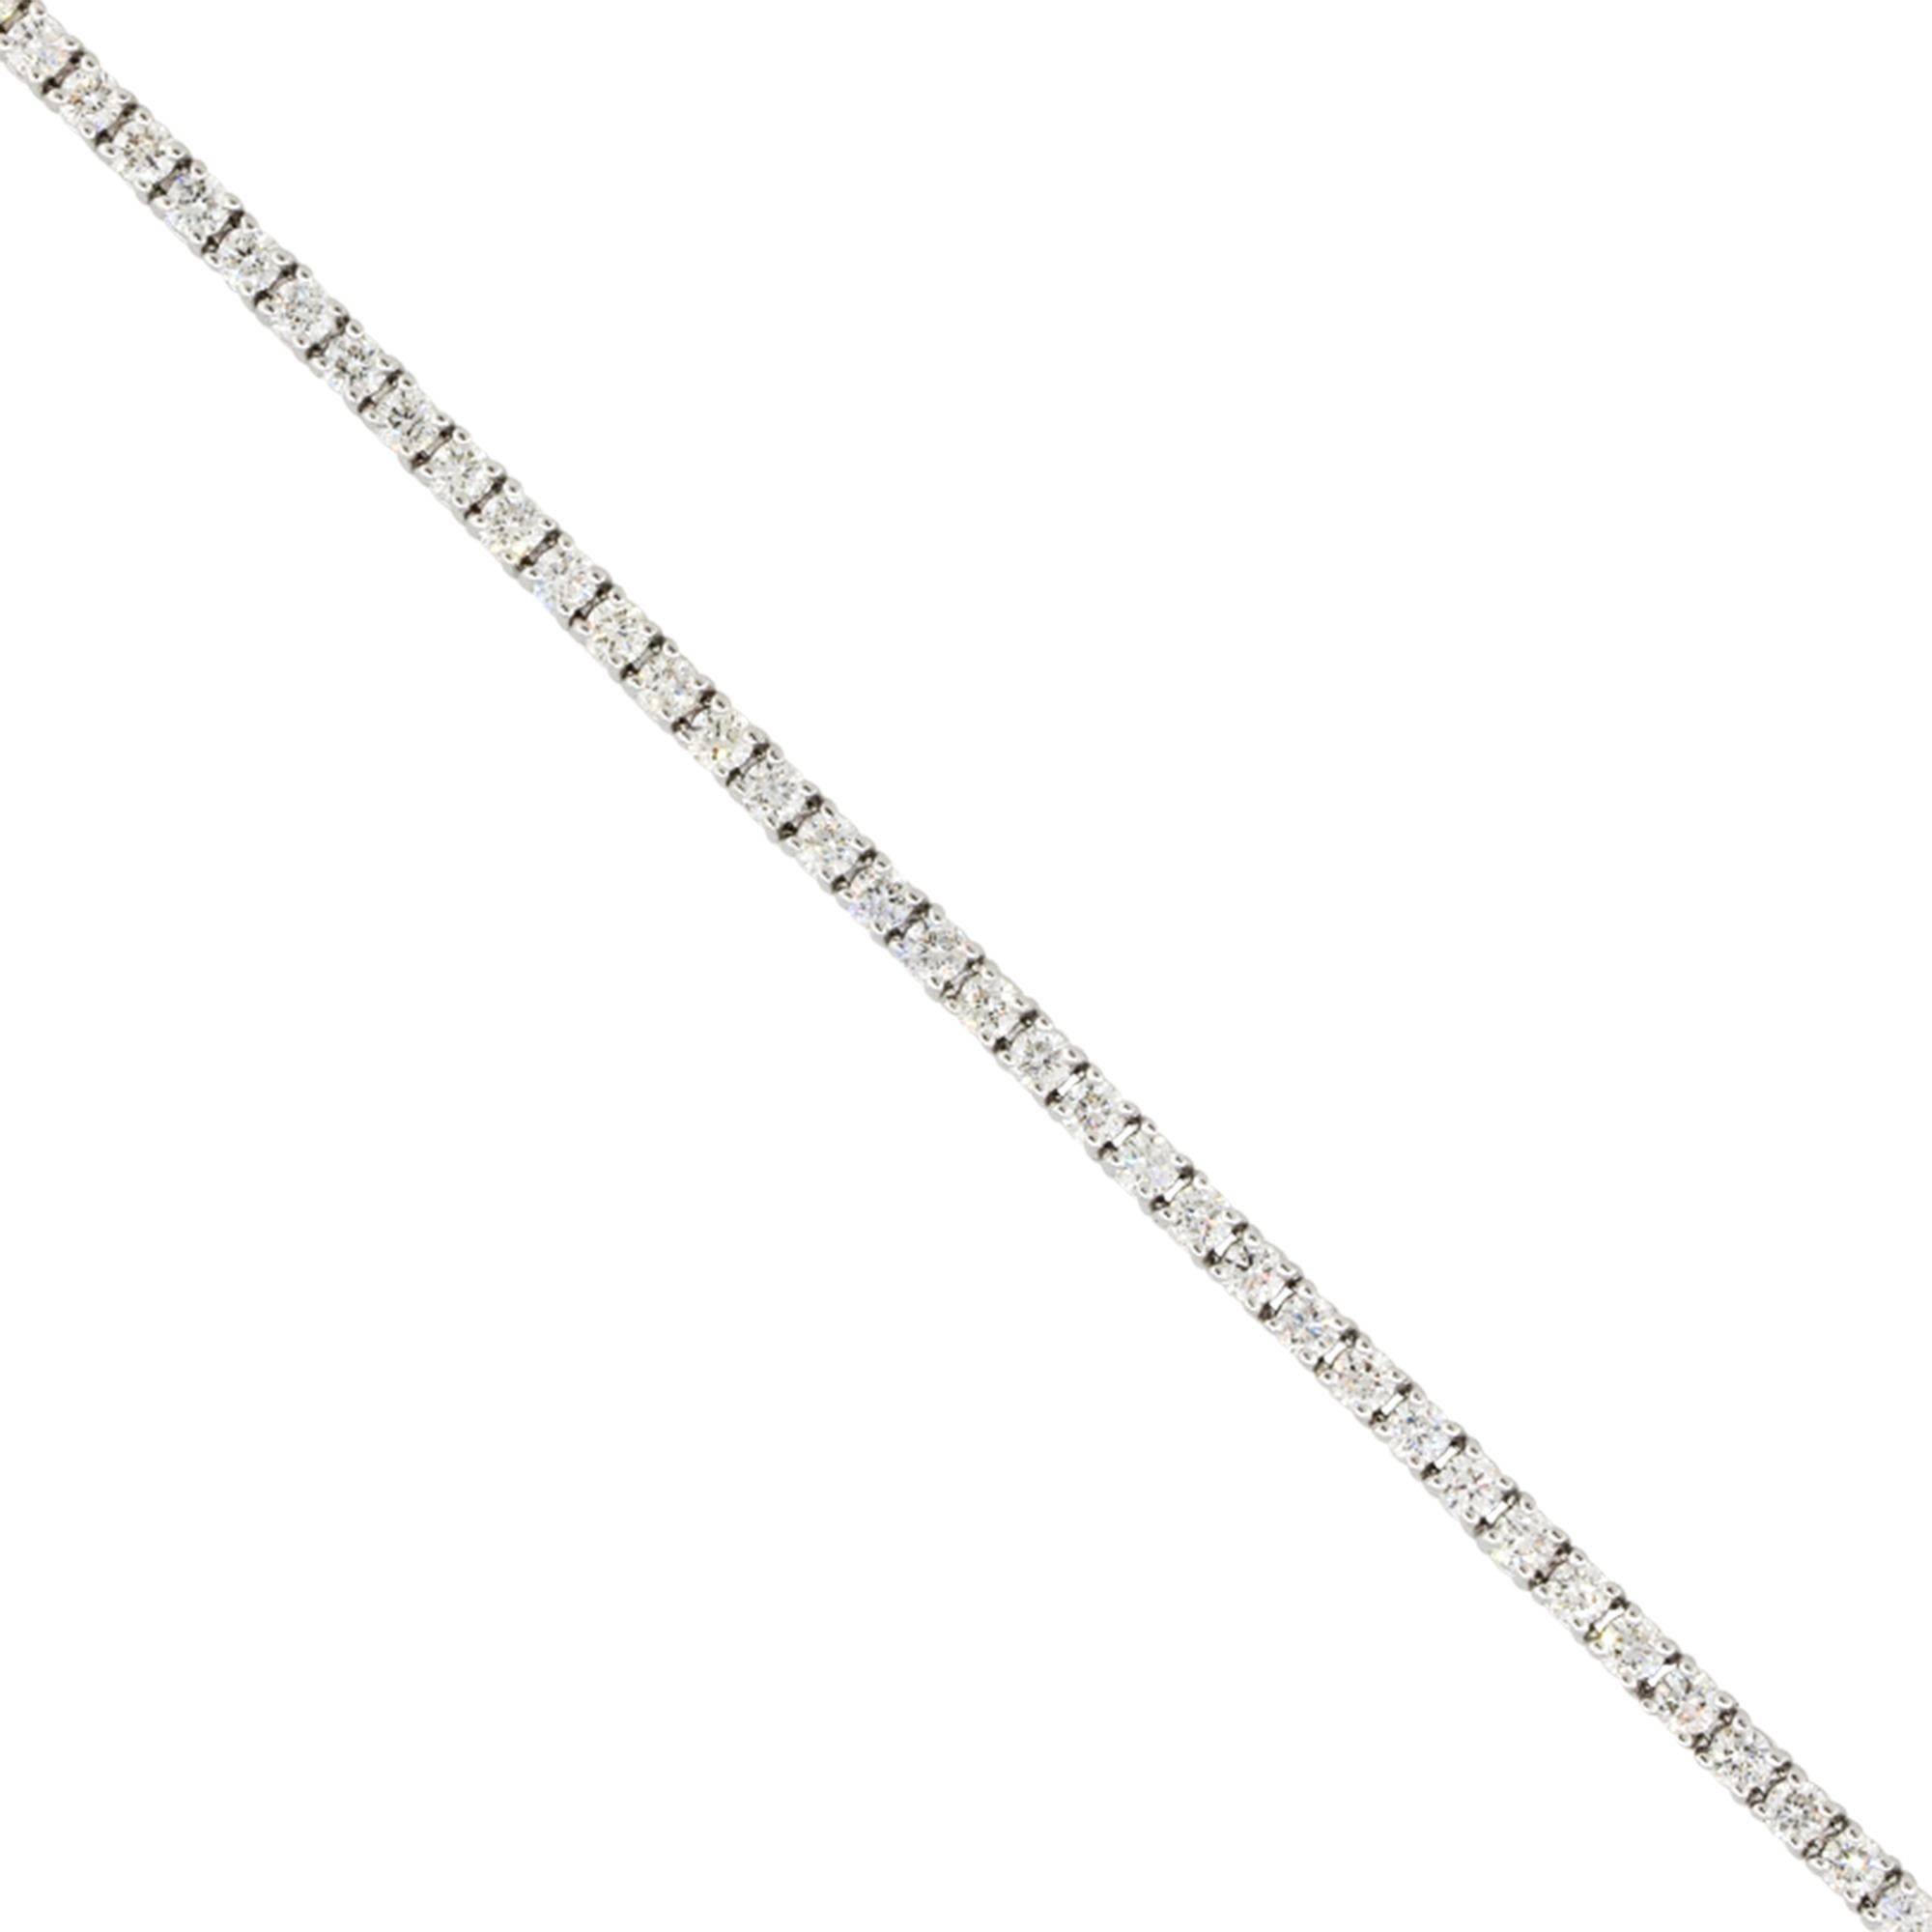 Material: 18k White Gold
Diamond Details: Approx. 2.15ctw of round brilliant Diamonds. Diamonds are G/H in color and VS in clarity
Clasps: Tongue in box clasp
Total Weight: 7.2g (4.7dwt)
Length: 7